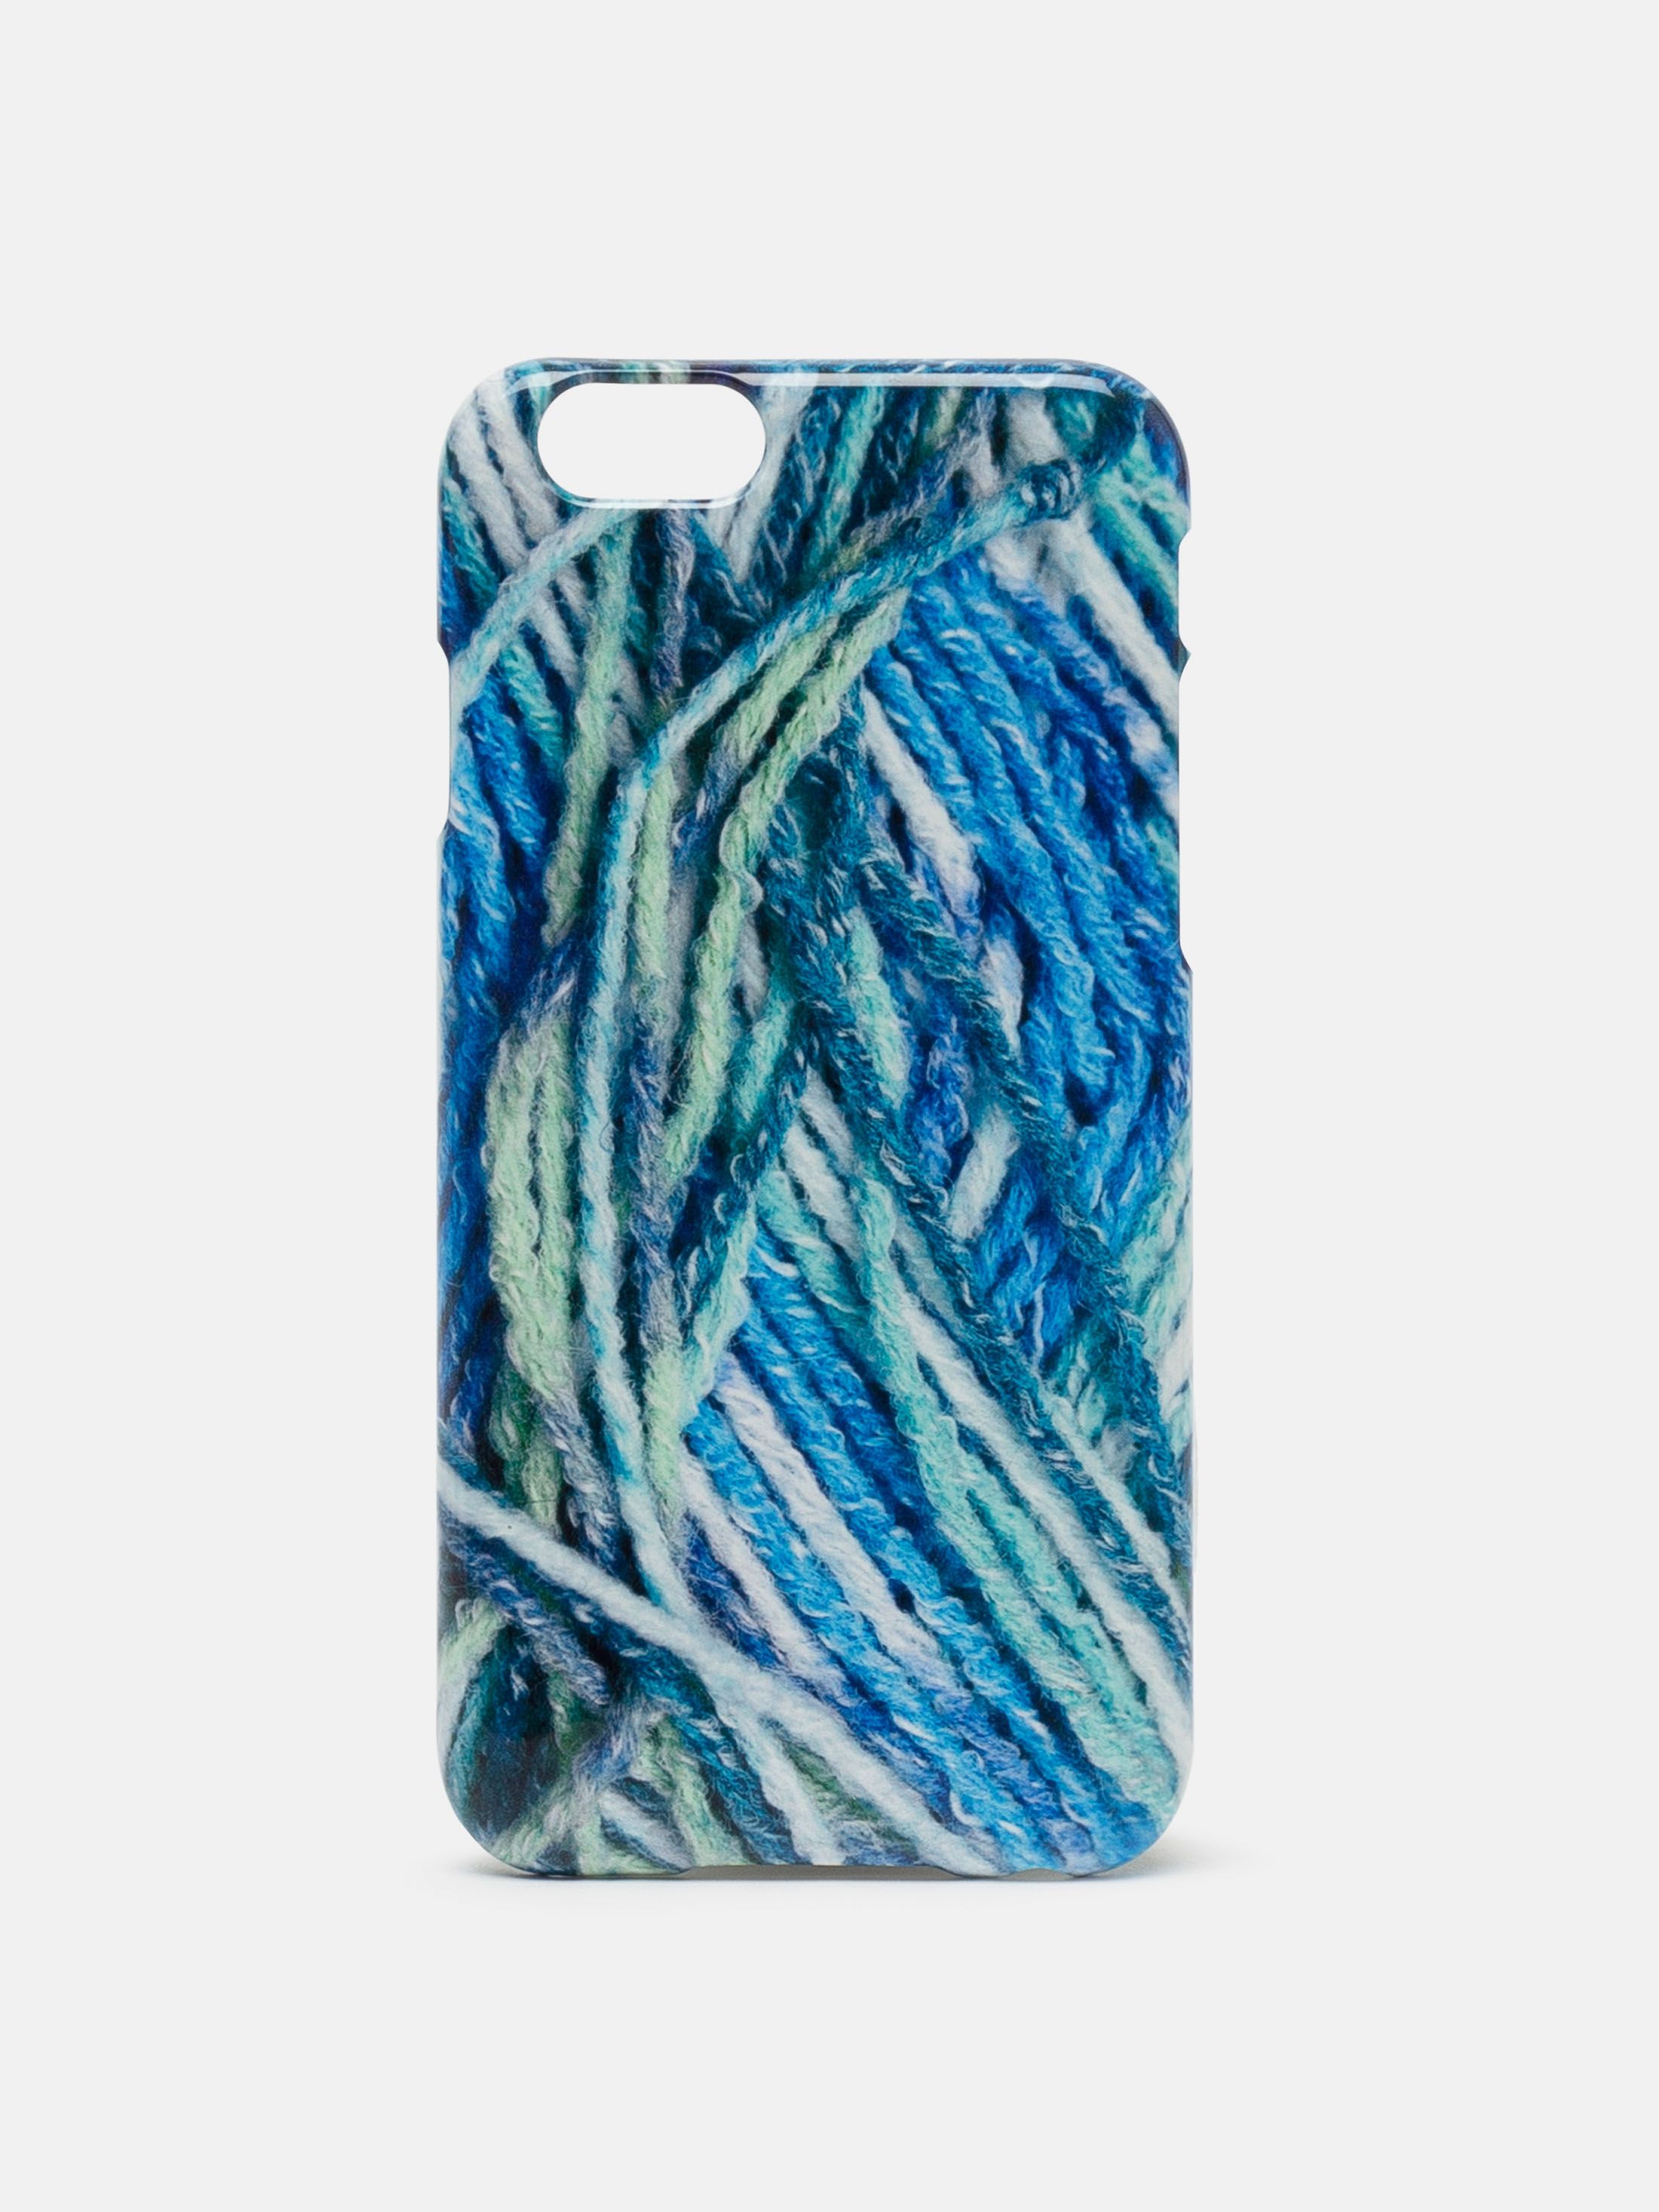 create your own iphone 6+ case